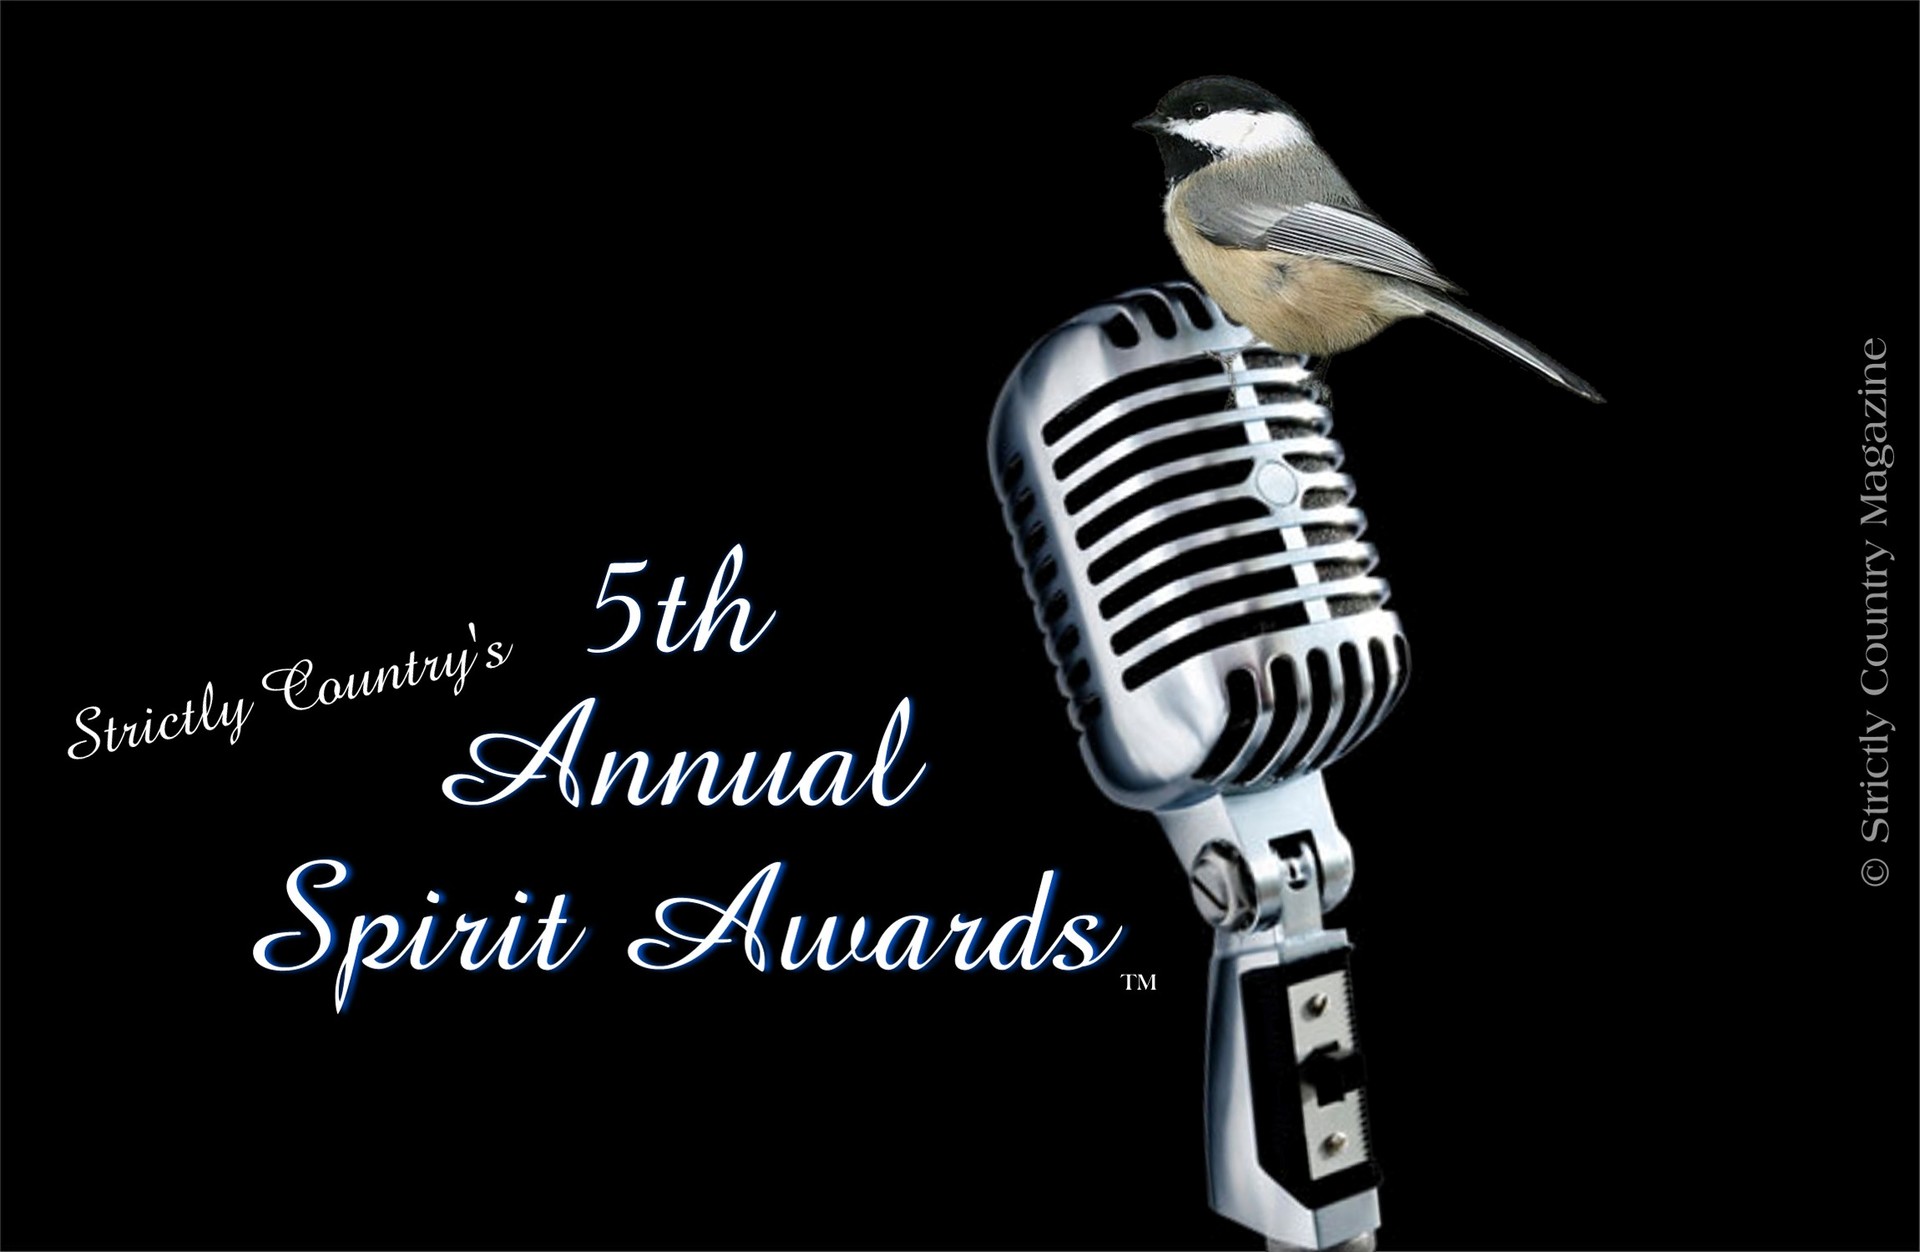 Strictly Country Magazine copyright 5th Annual Spirit Awards official logo